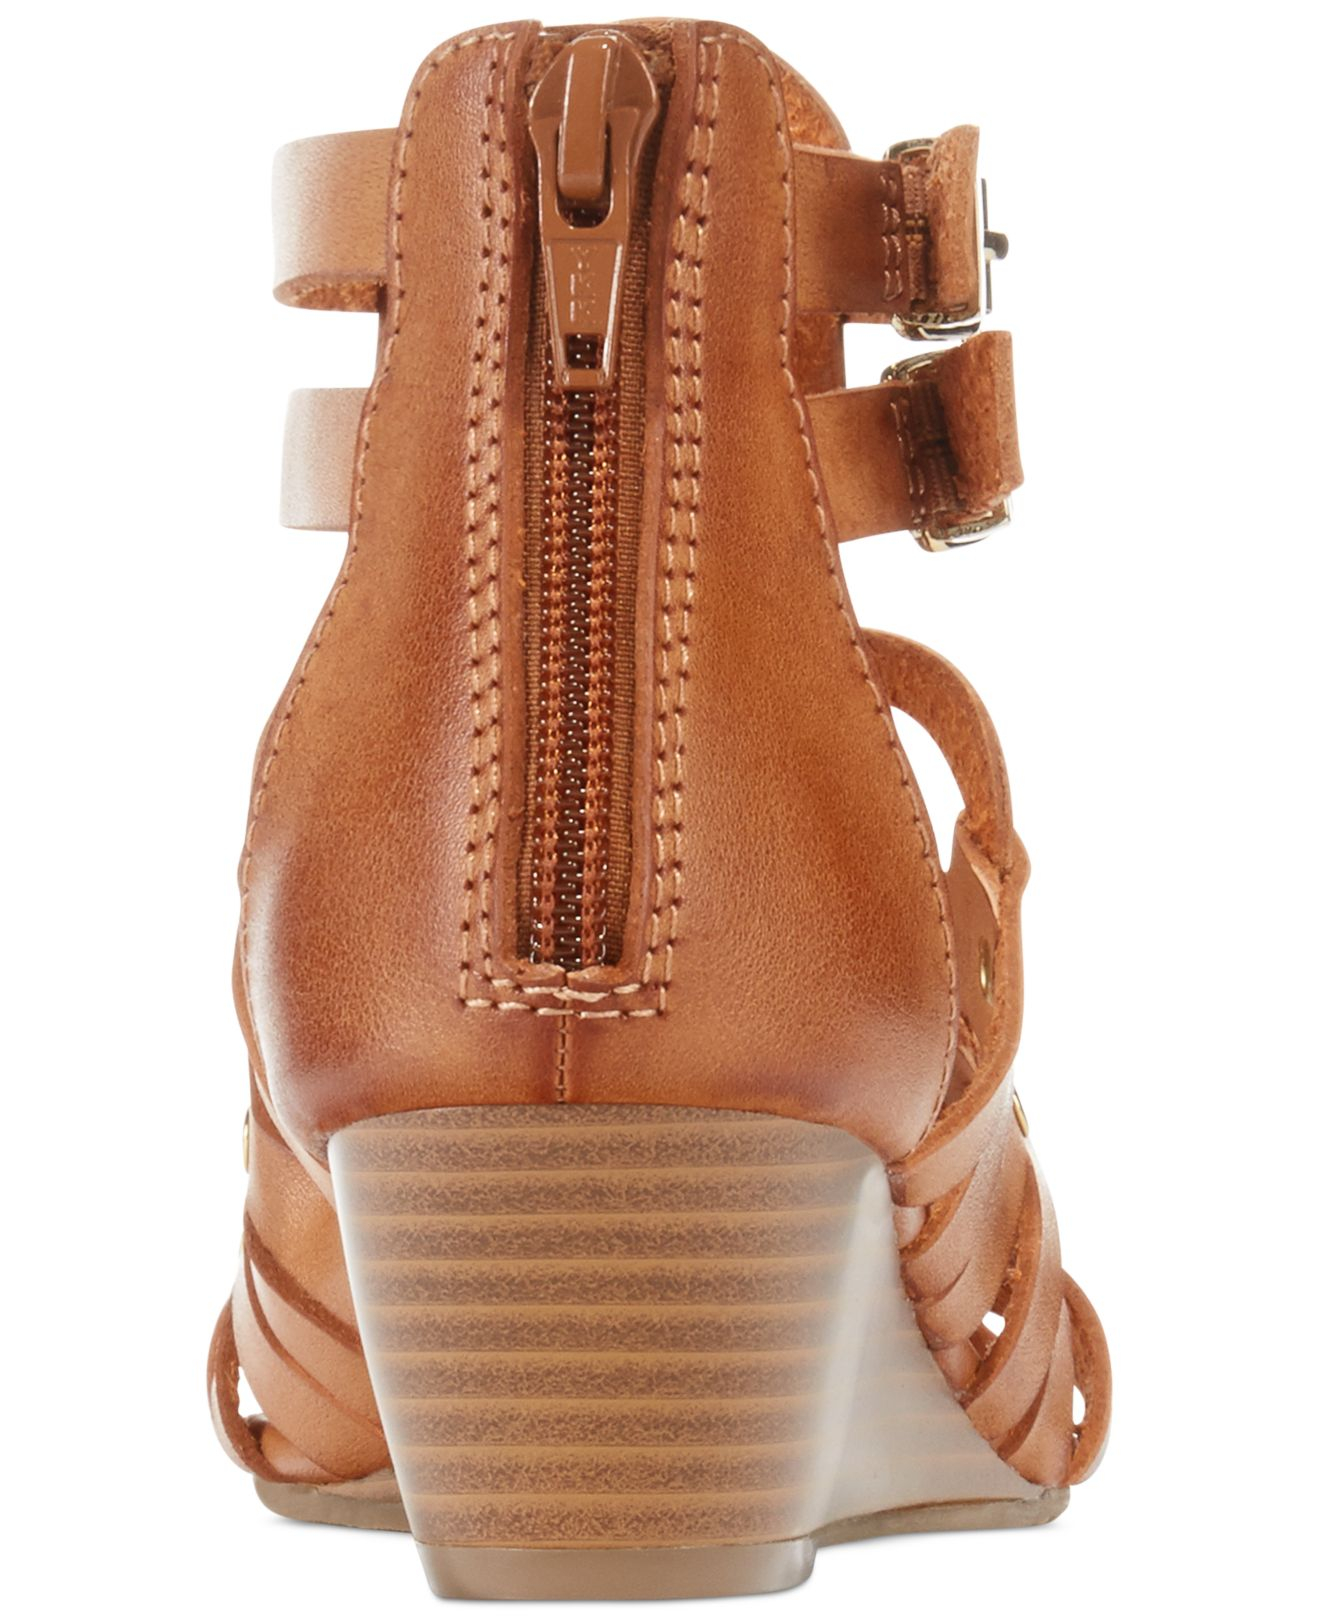 Lyst - Report Midori Caged Gladiator Wedge Sandals in Brown